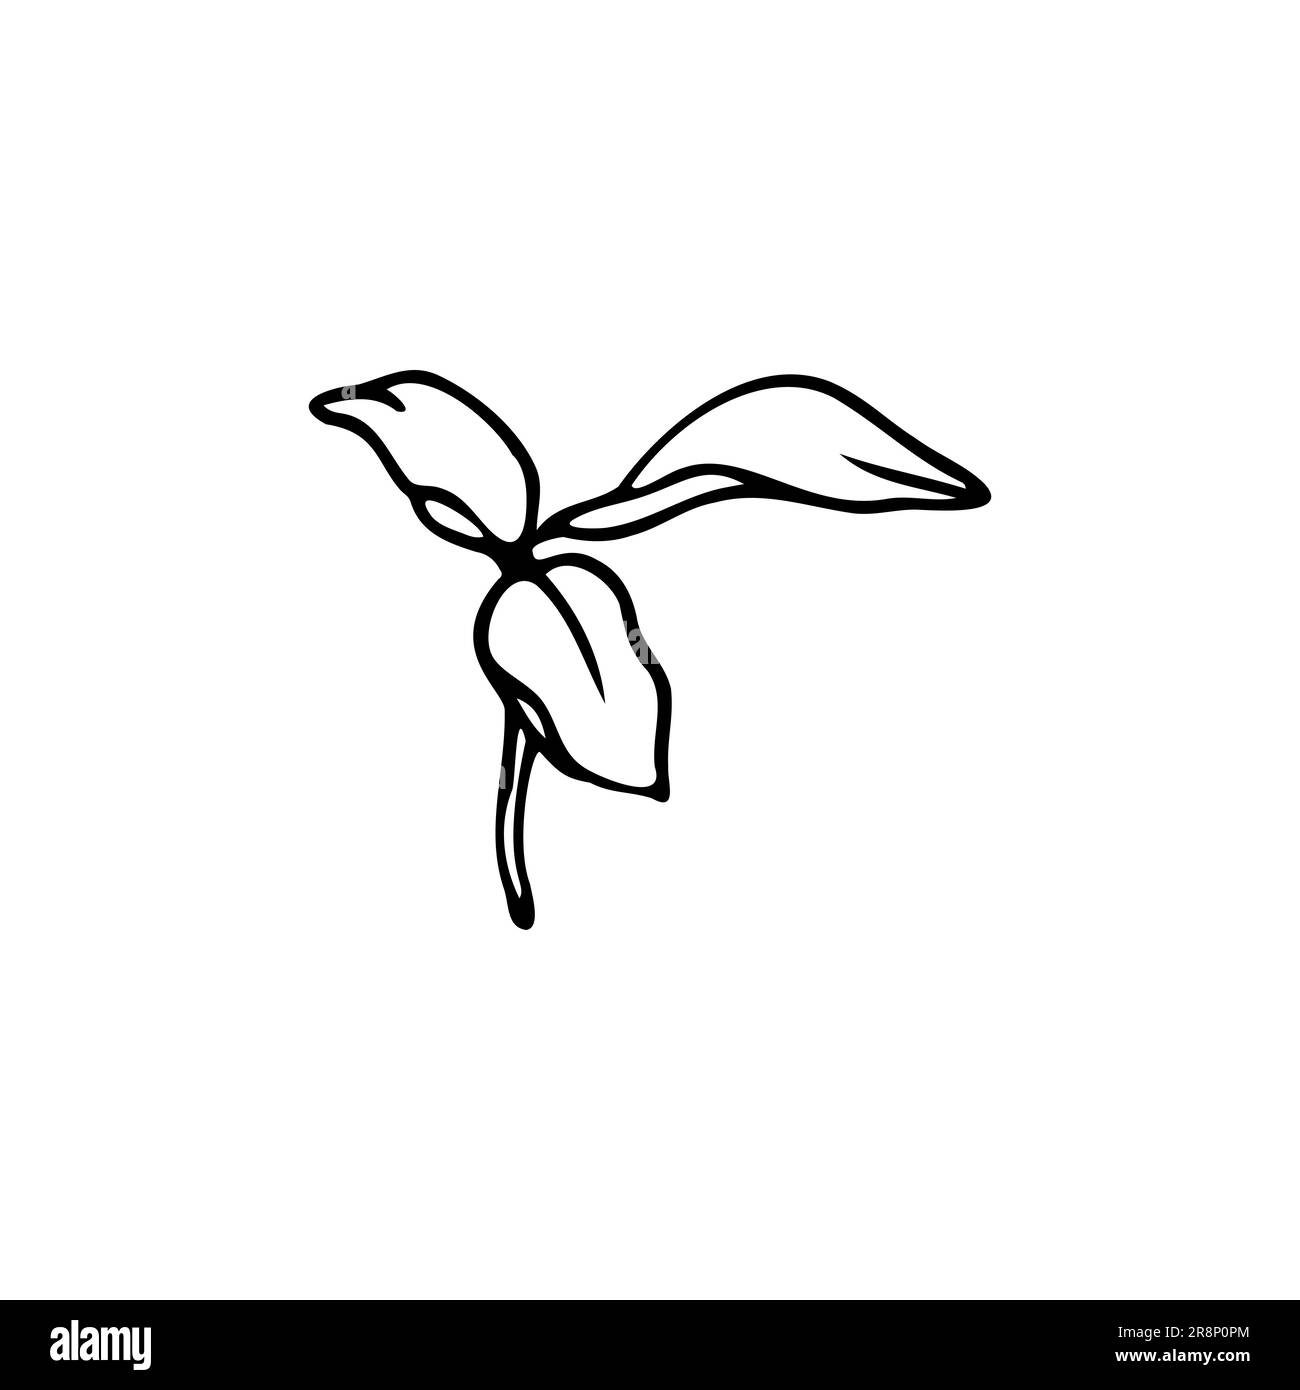 Lily flower hand drawn design, floral vector element isolate on white background Stock Vector